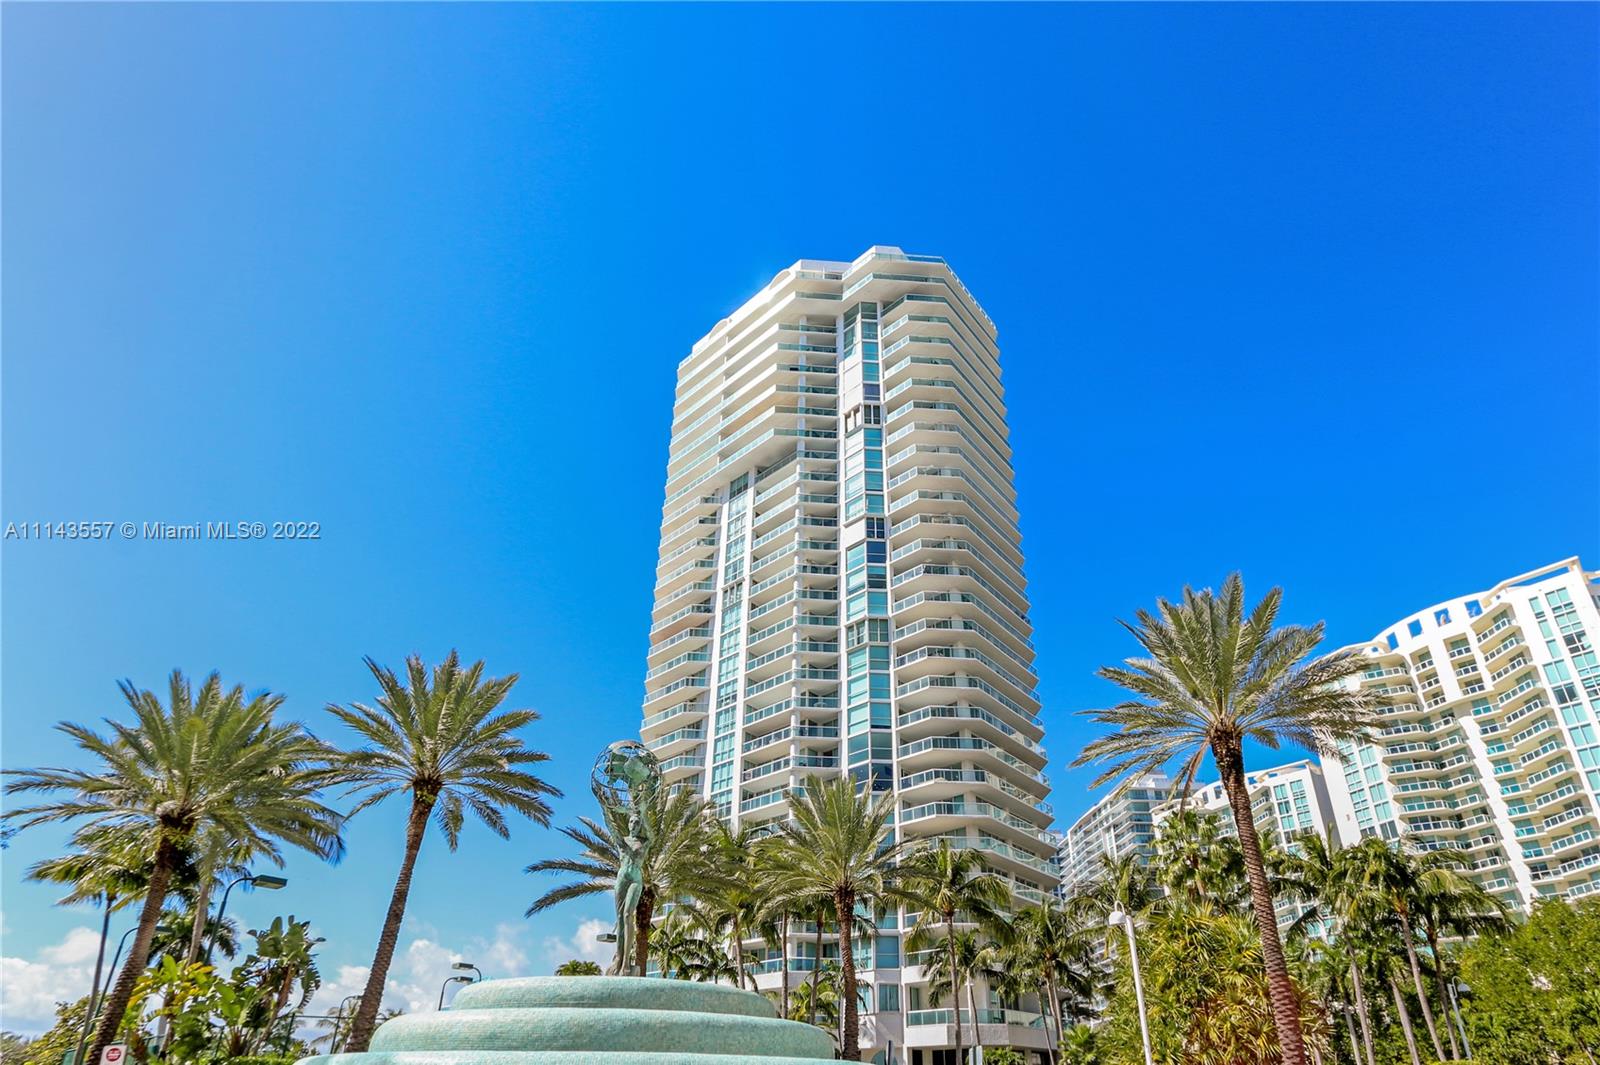 16400  Collins Ave #946 For Sale A11143557, FL